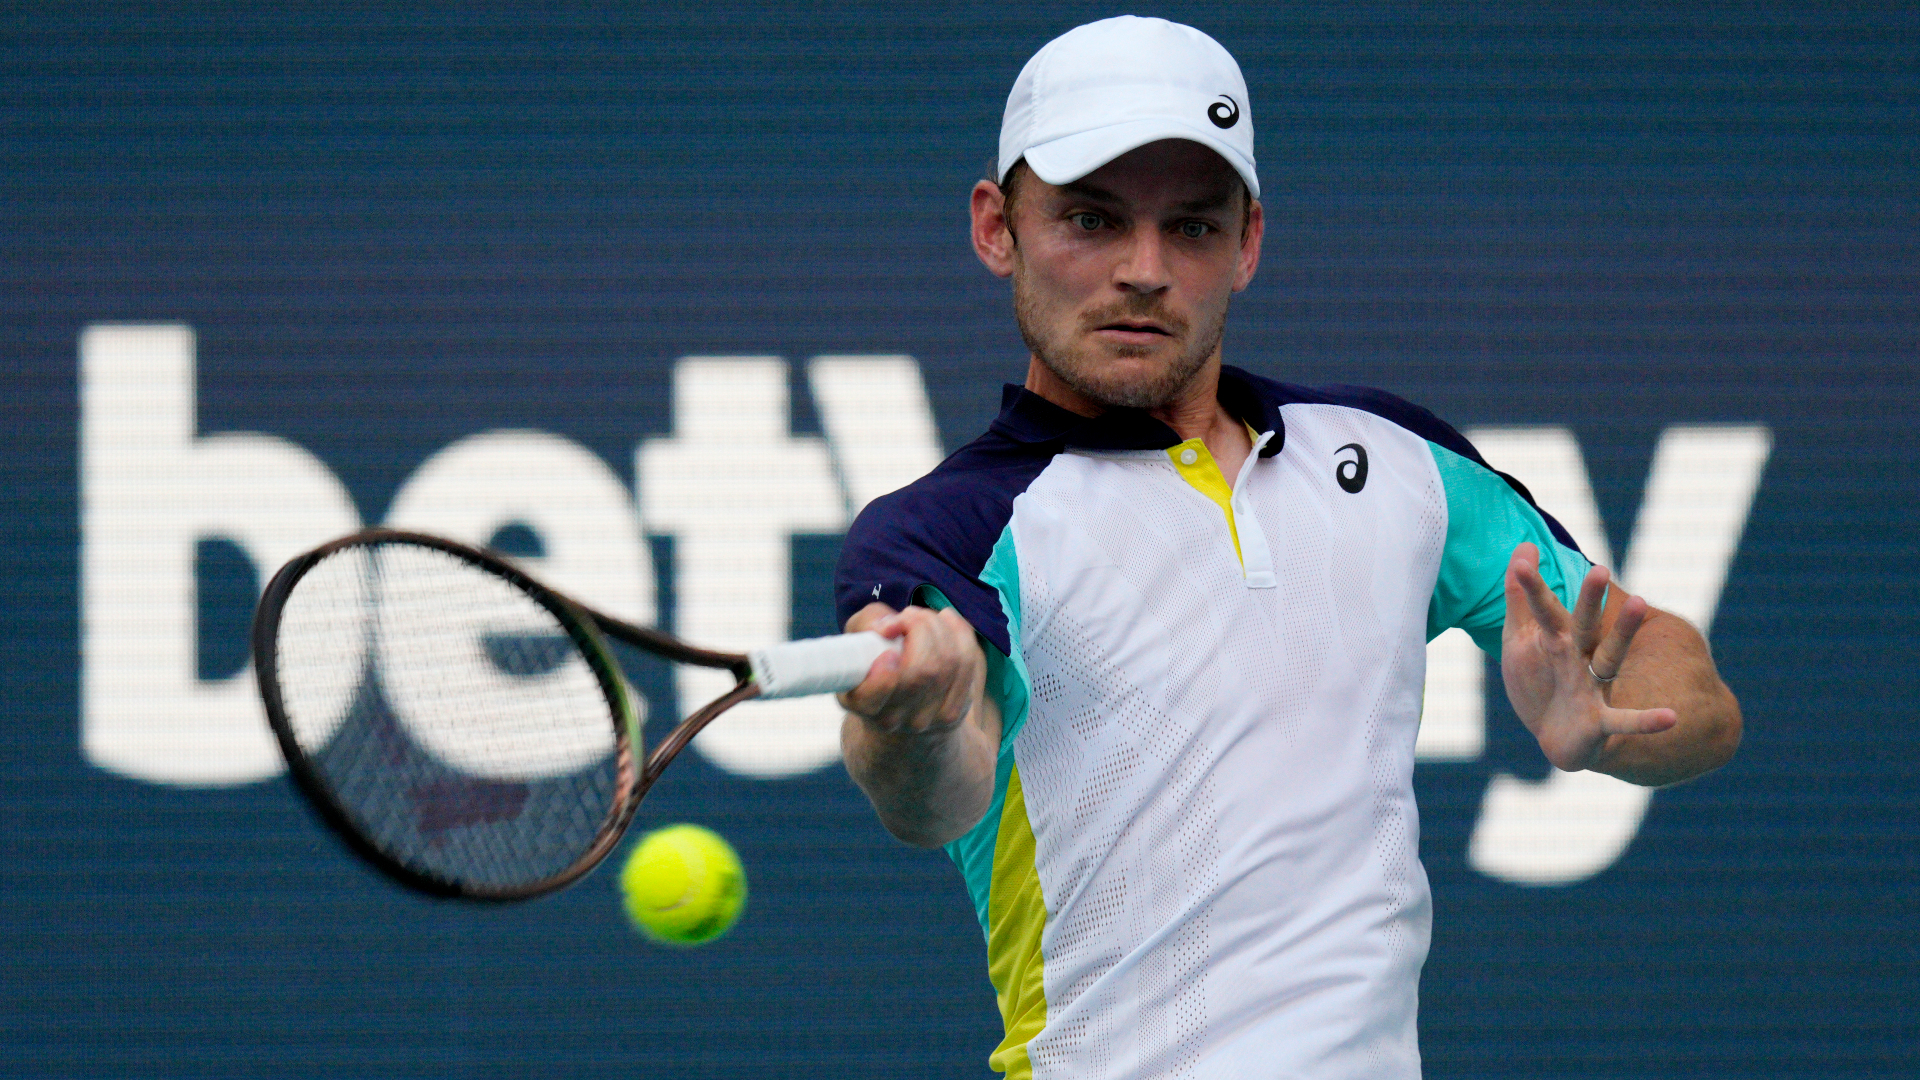 Goffin lands sixth ATP title with Marrakesh tr beIN SPORTS